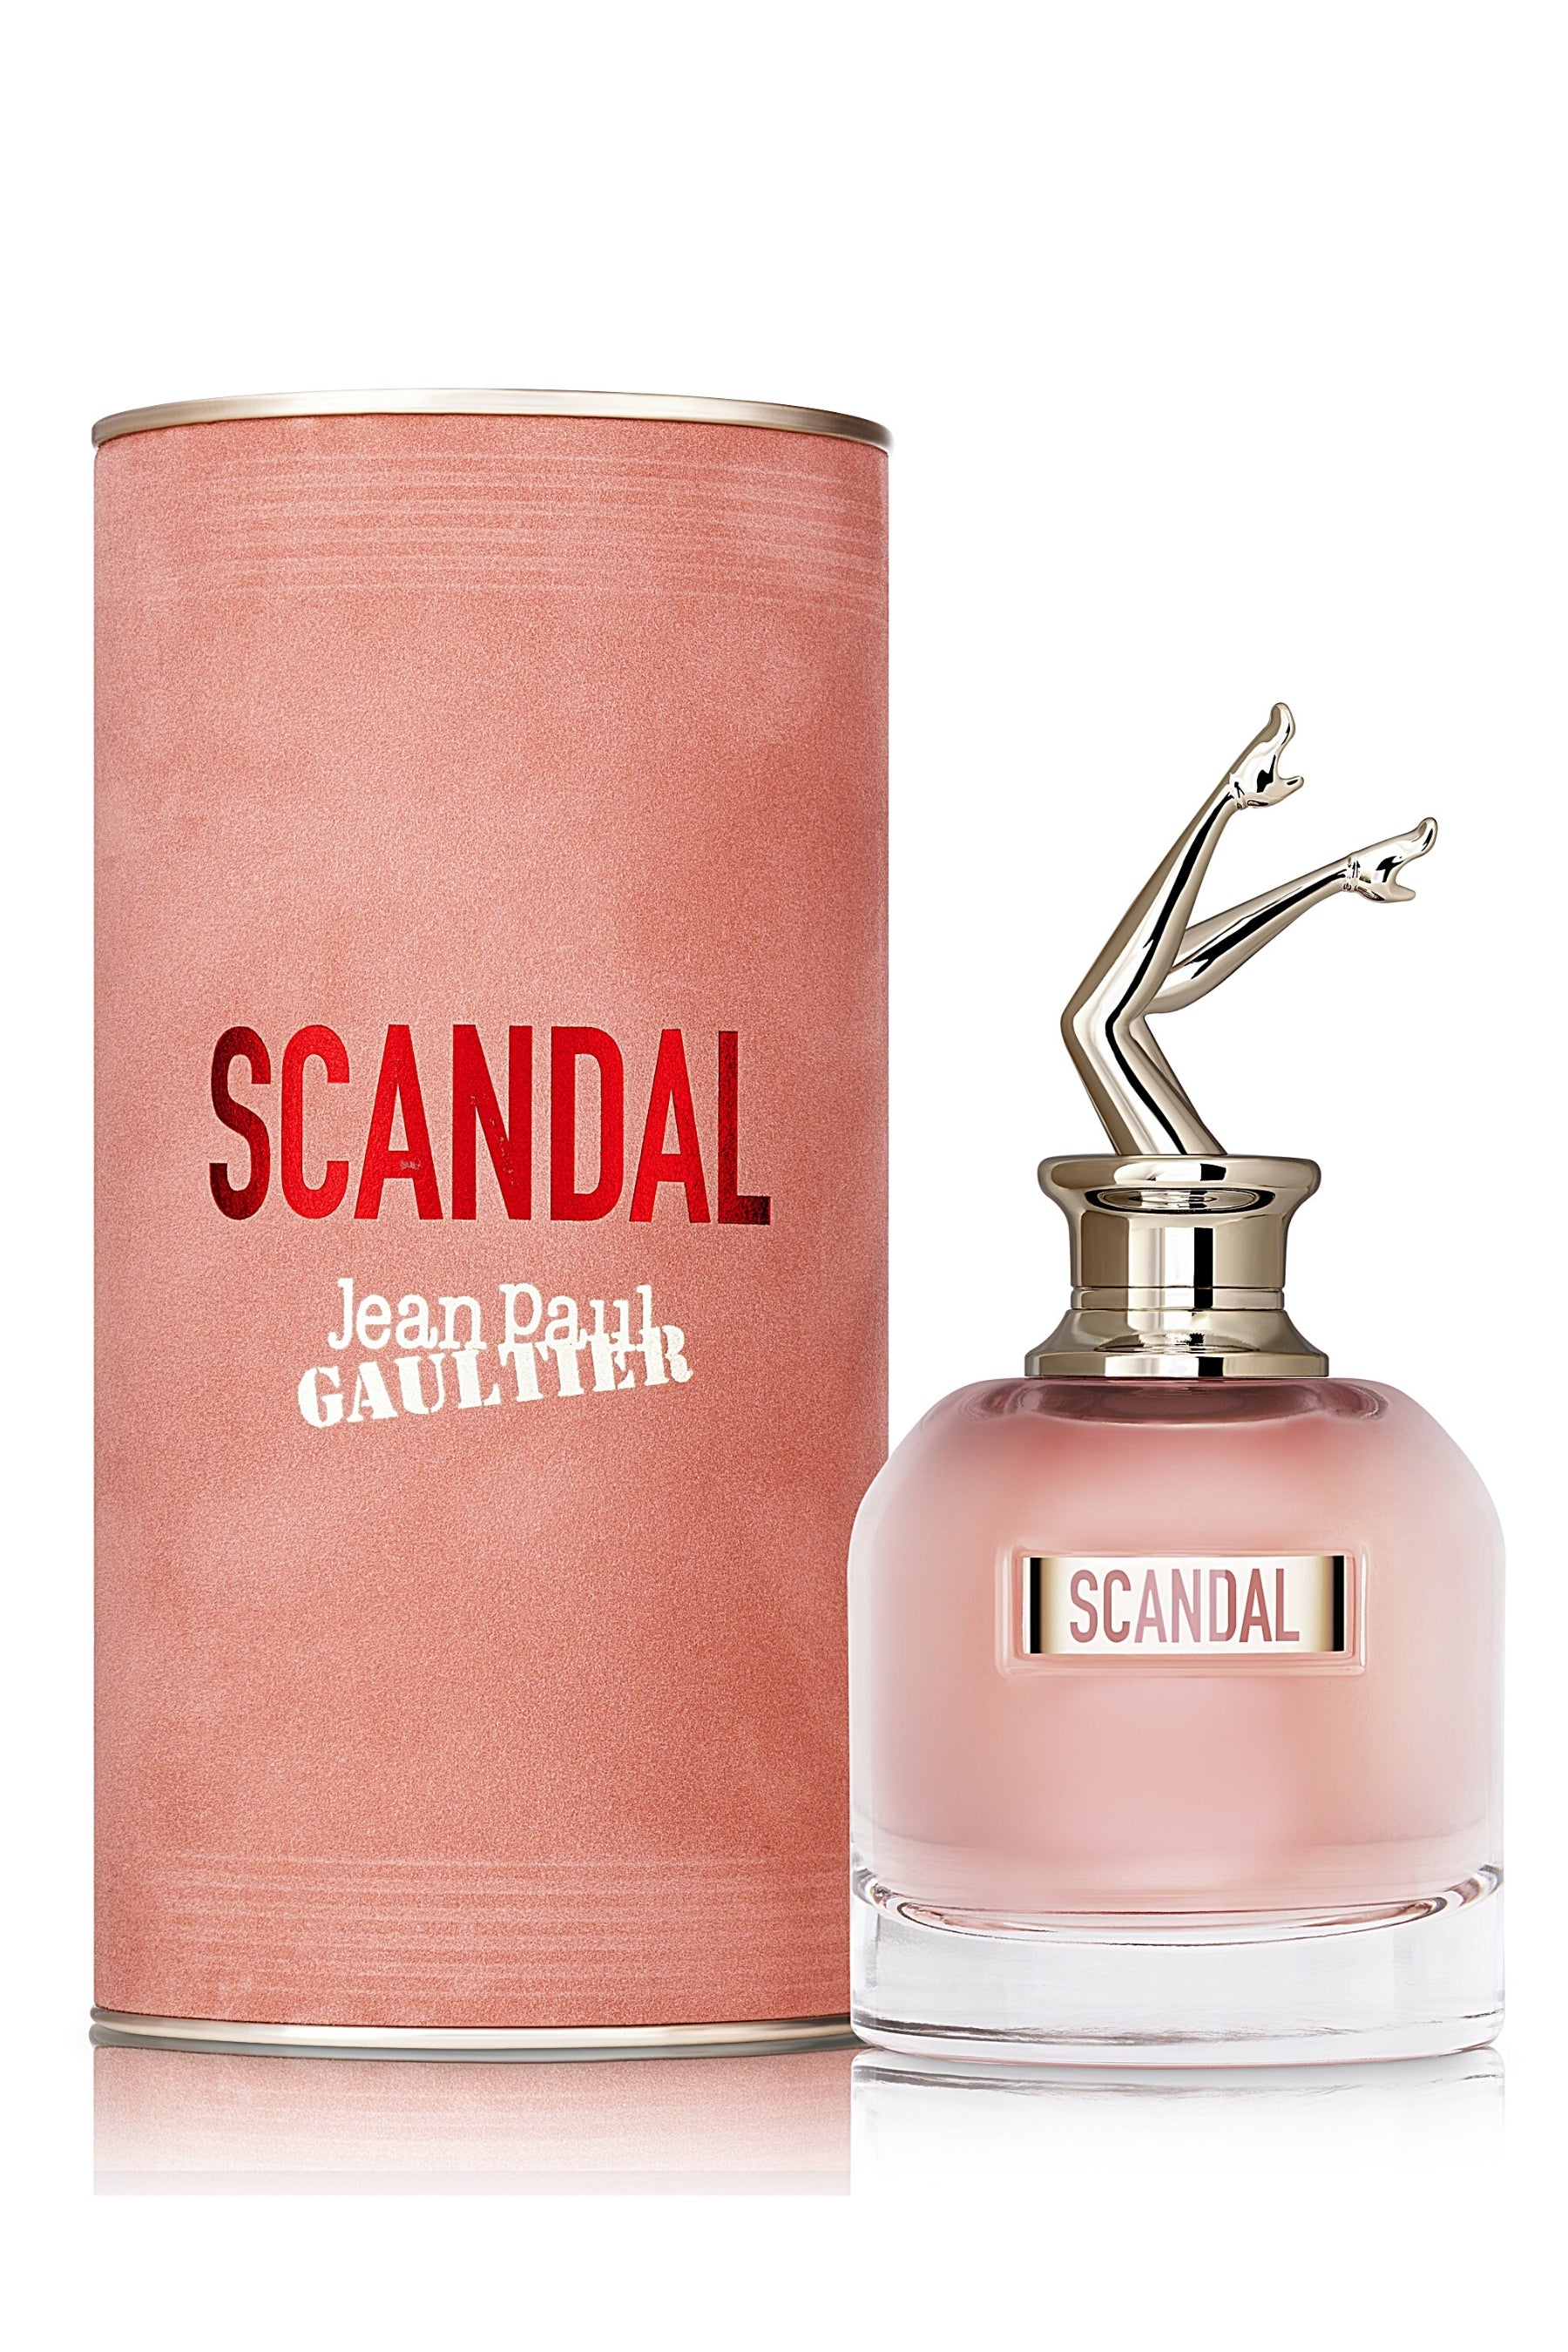 The Truth About Scandal Perfume: What You Need to Know - BeautyKylie